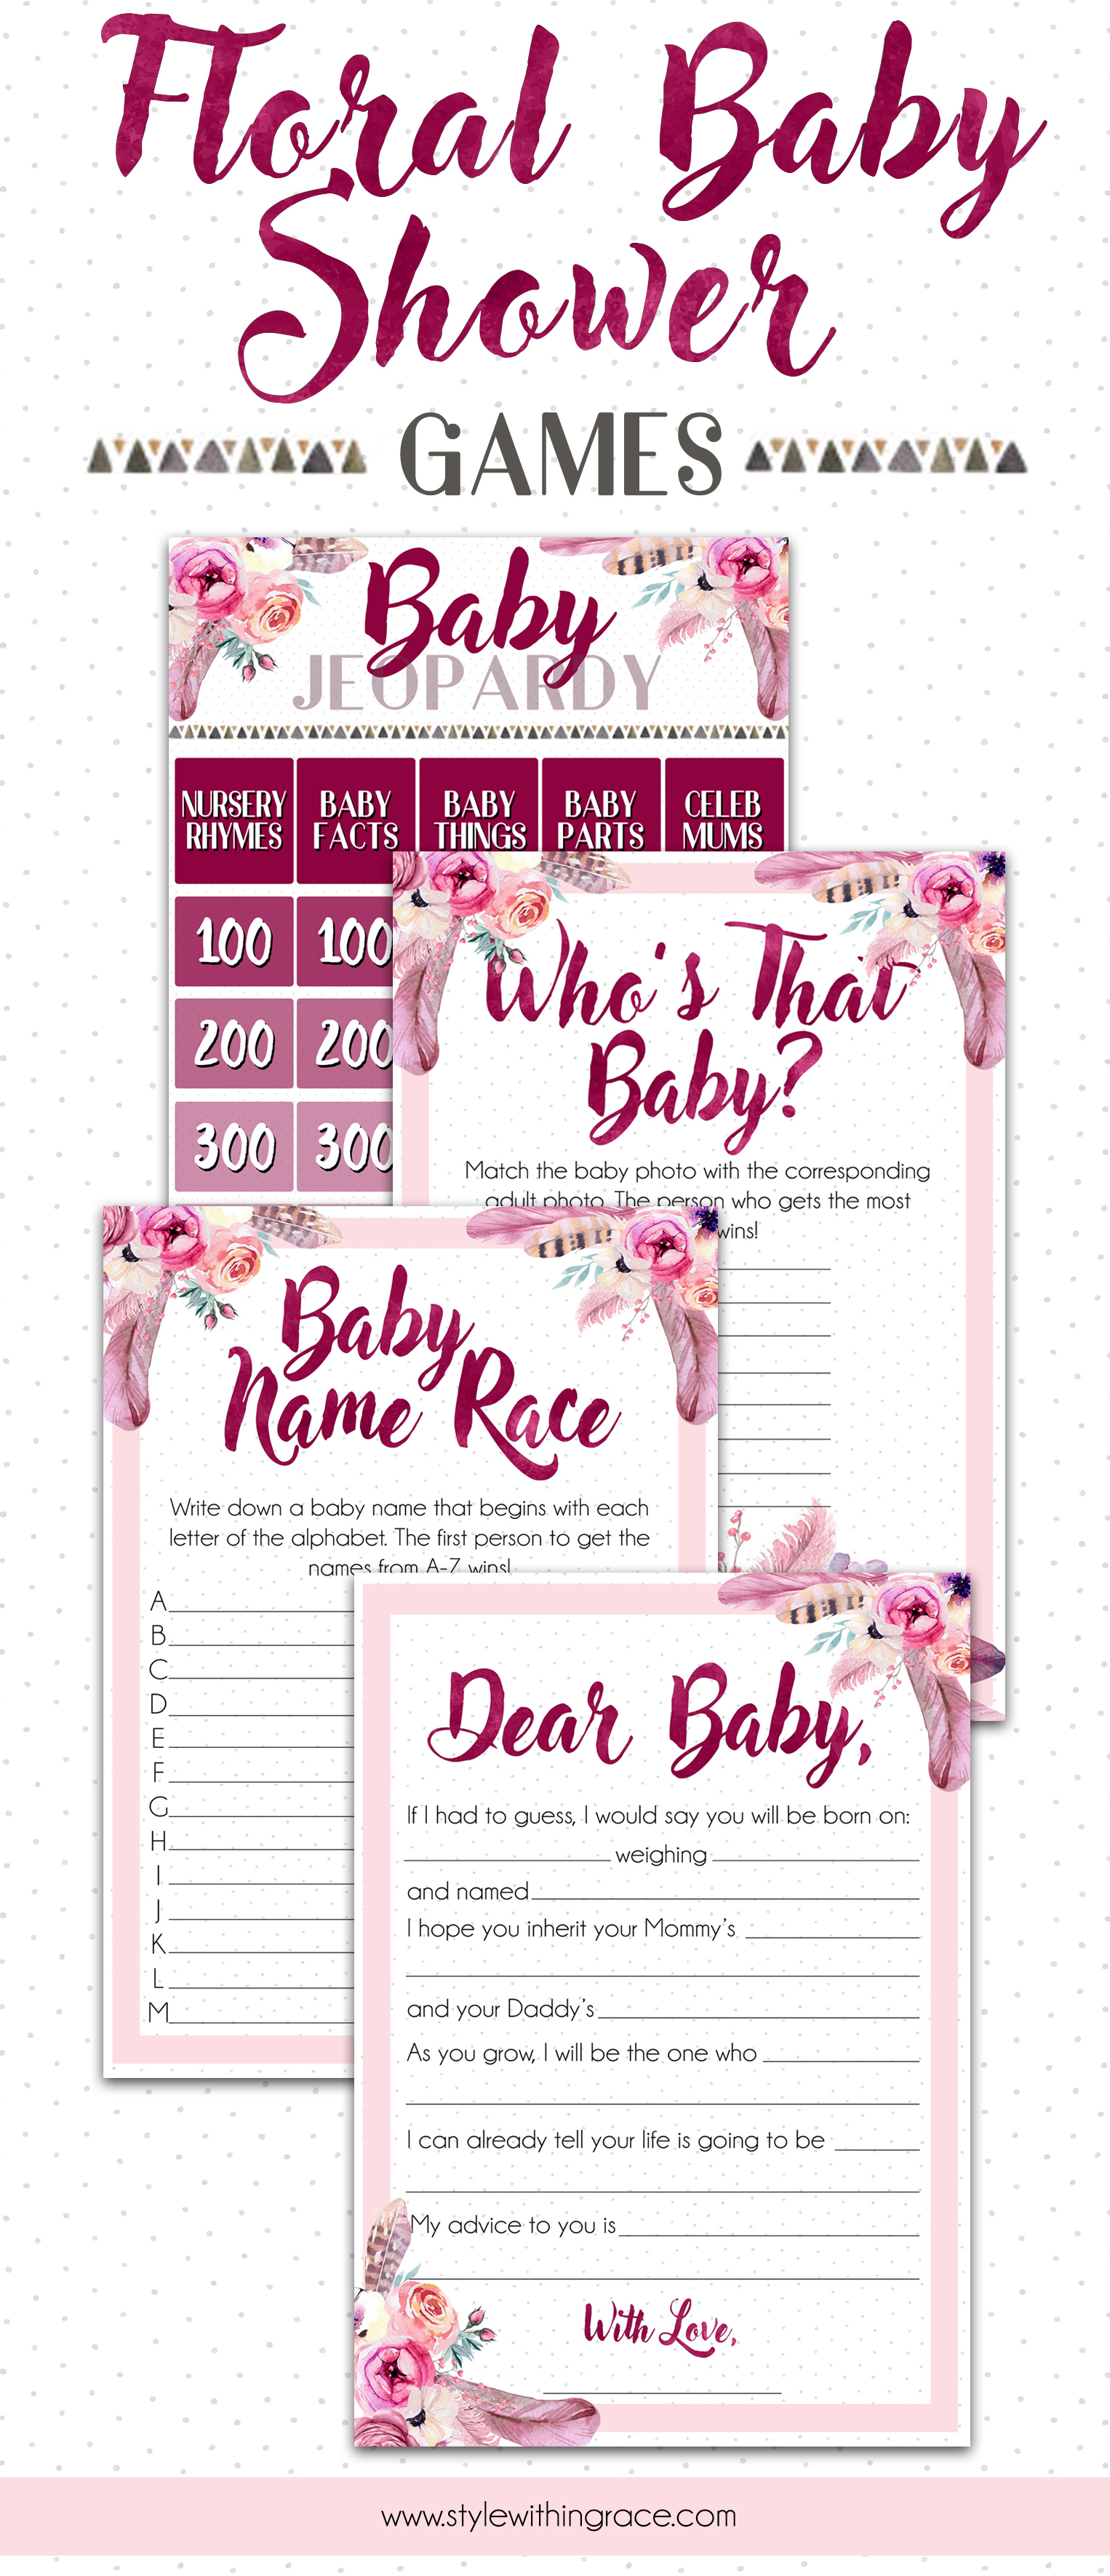 Floral Baby Shower Pinterest Graphic - Games